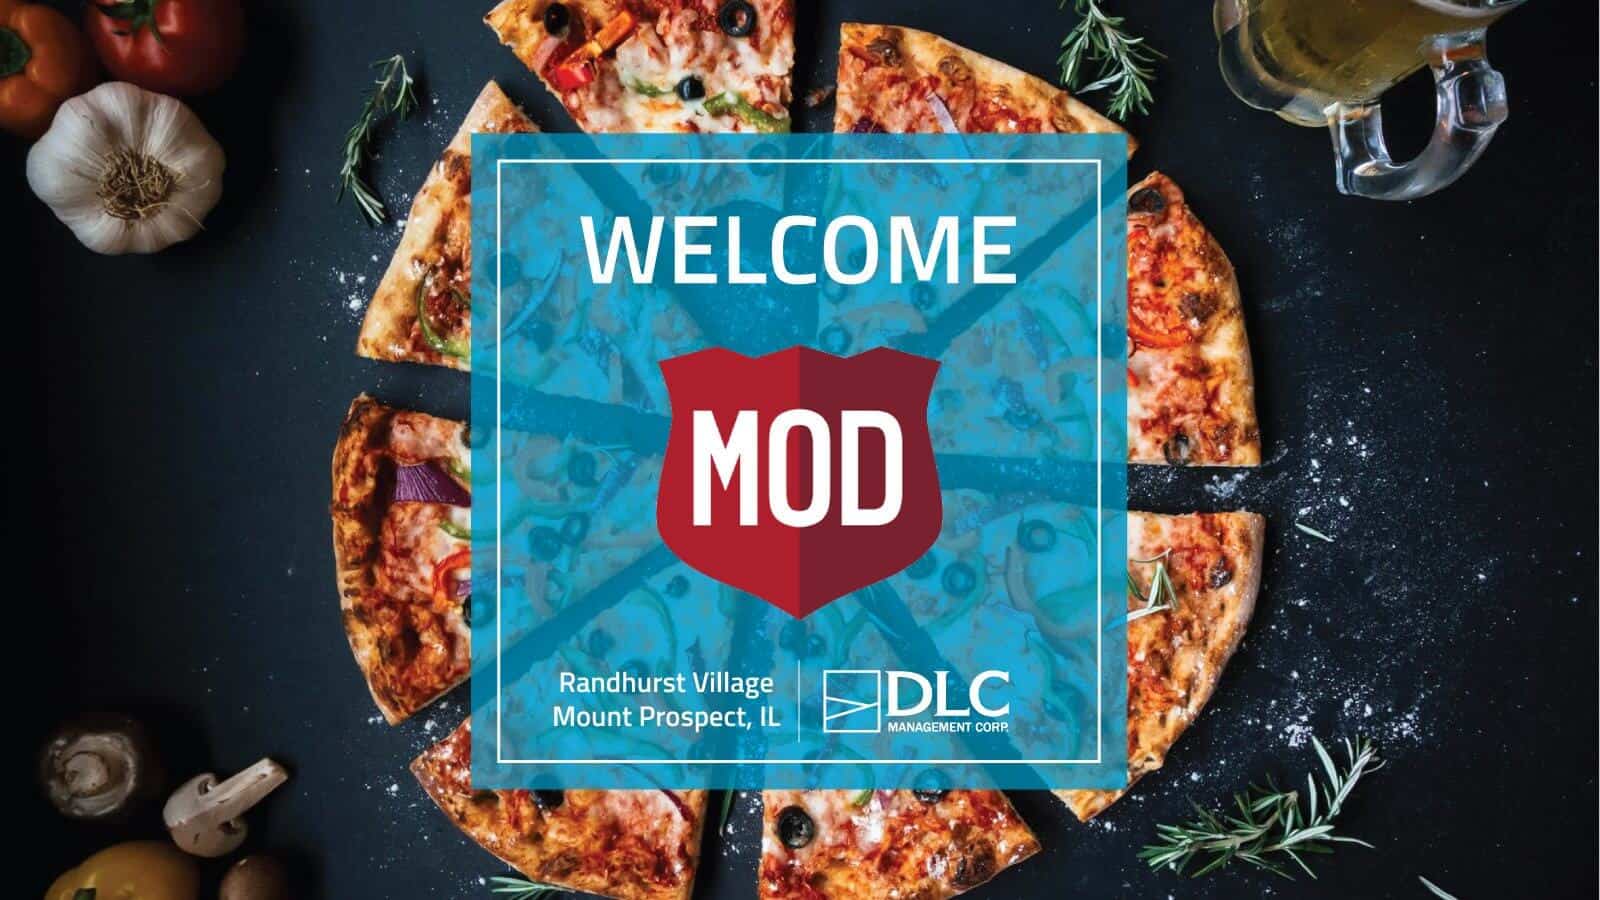 Pizza pie surrounded by fresh ingredients with the graphic "Welcome MOD: Randhurst Village, Mount Prospect, IL"